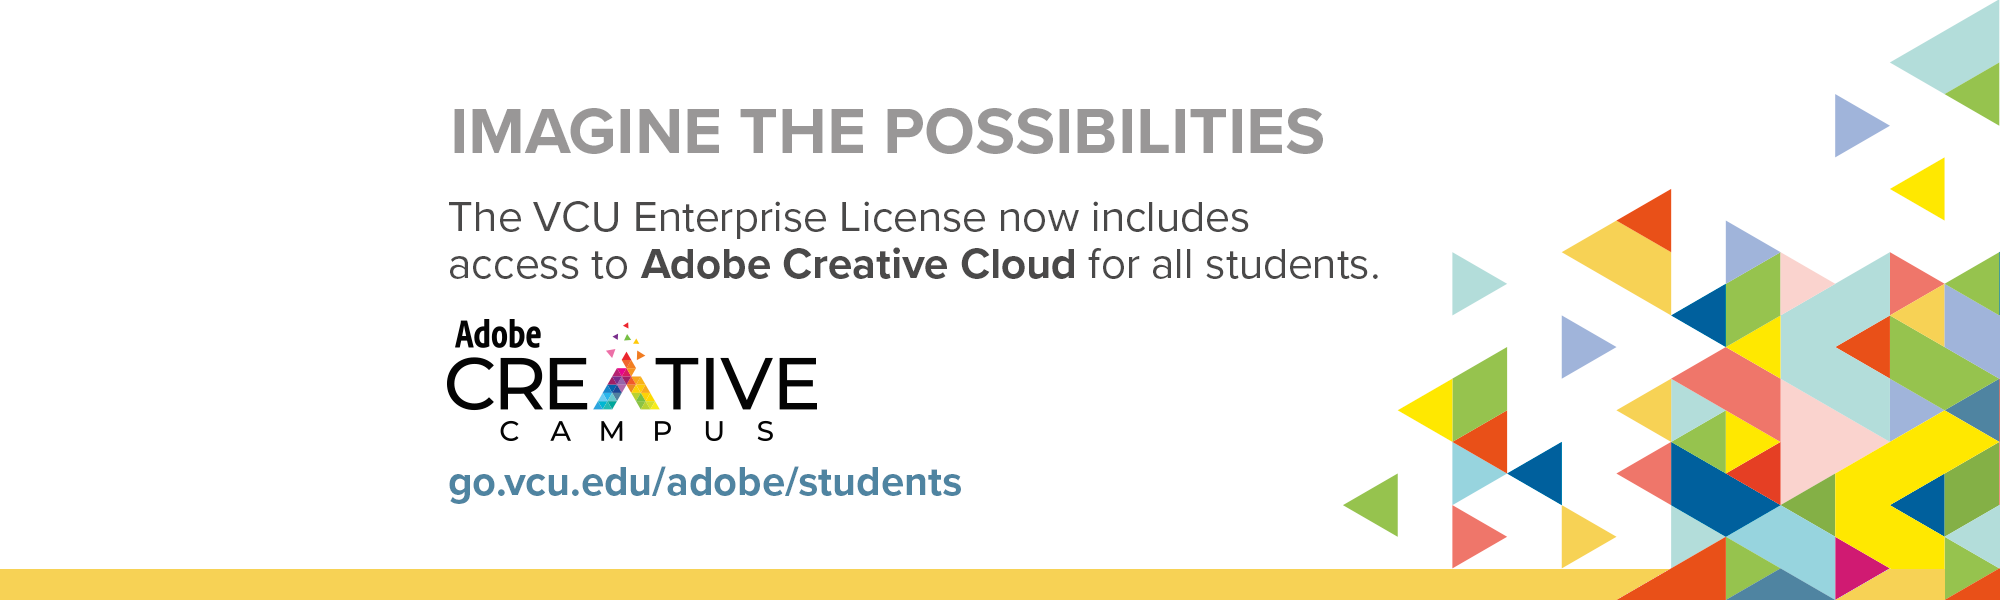 Imagine the Possibilities with Adobe Creative Cloud